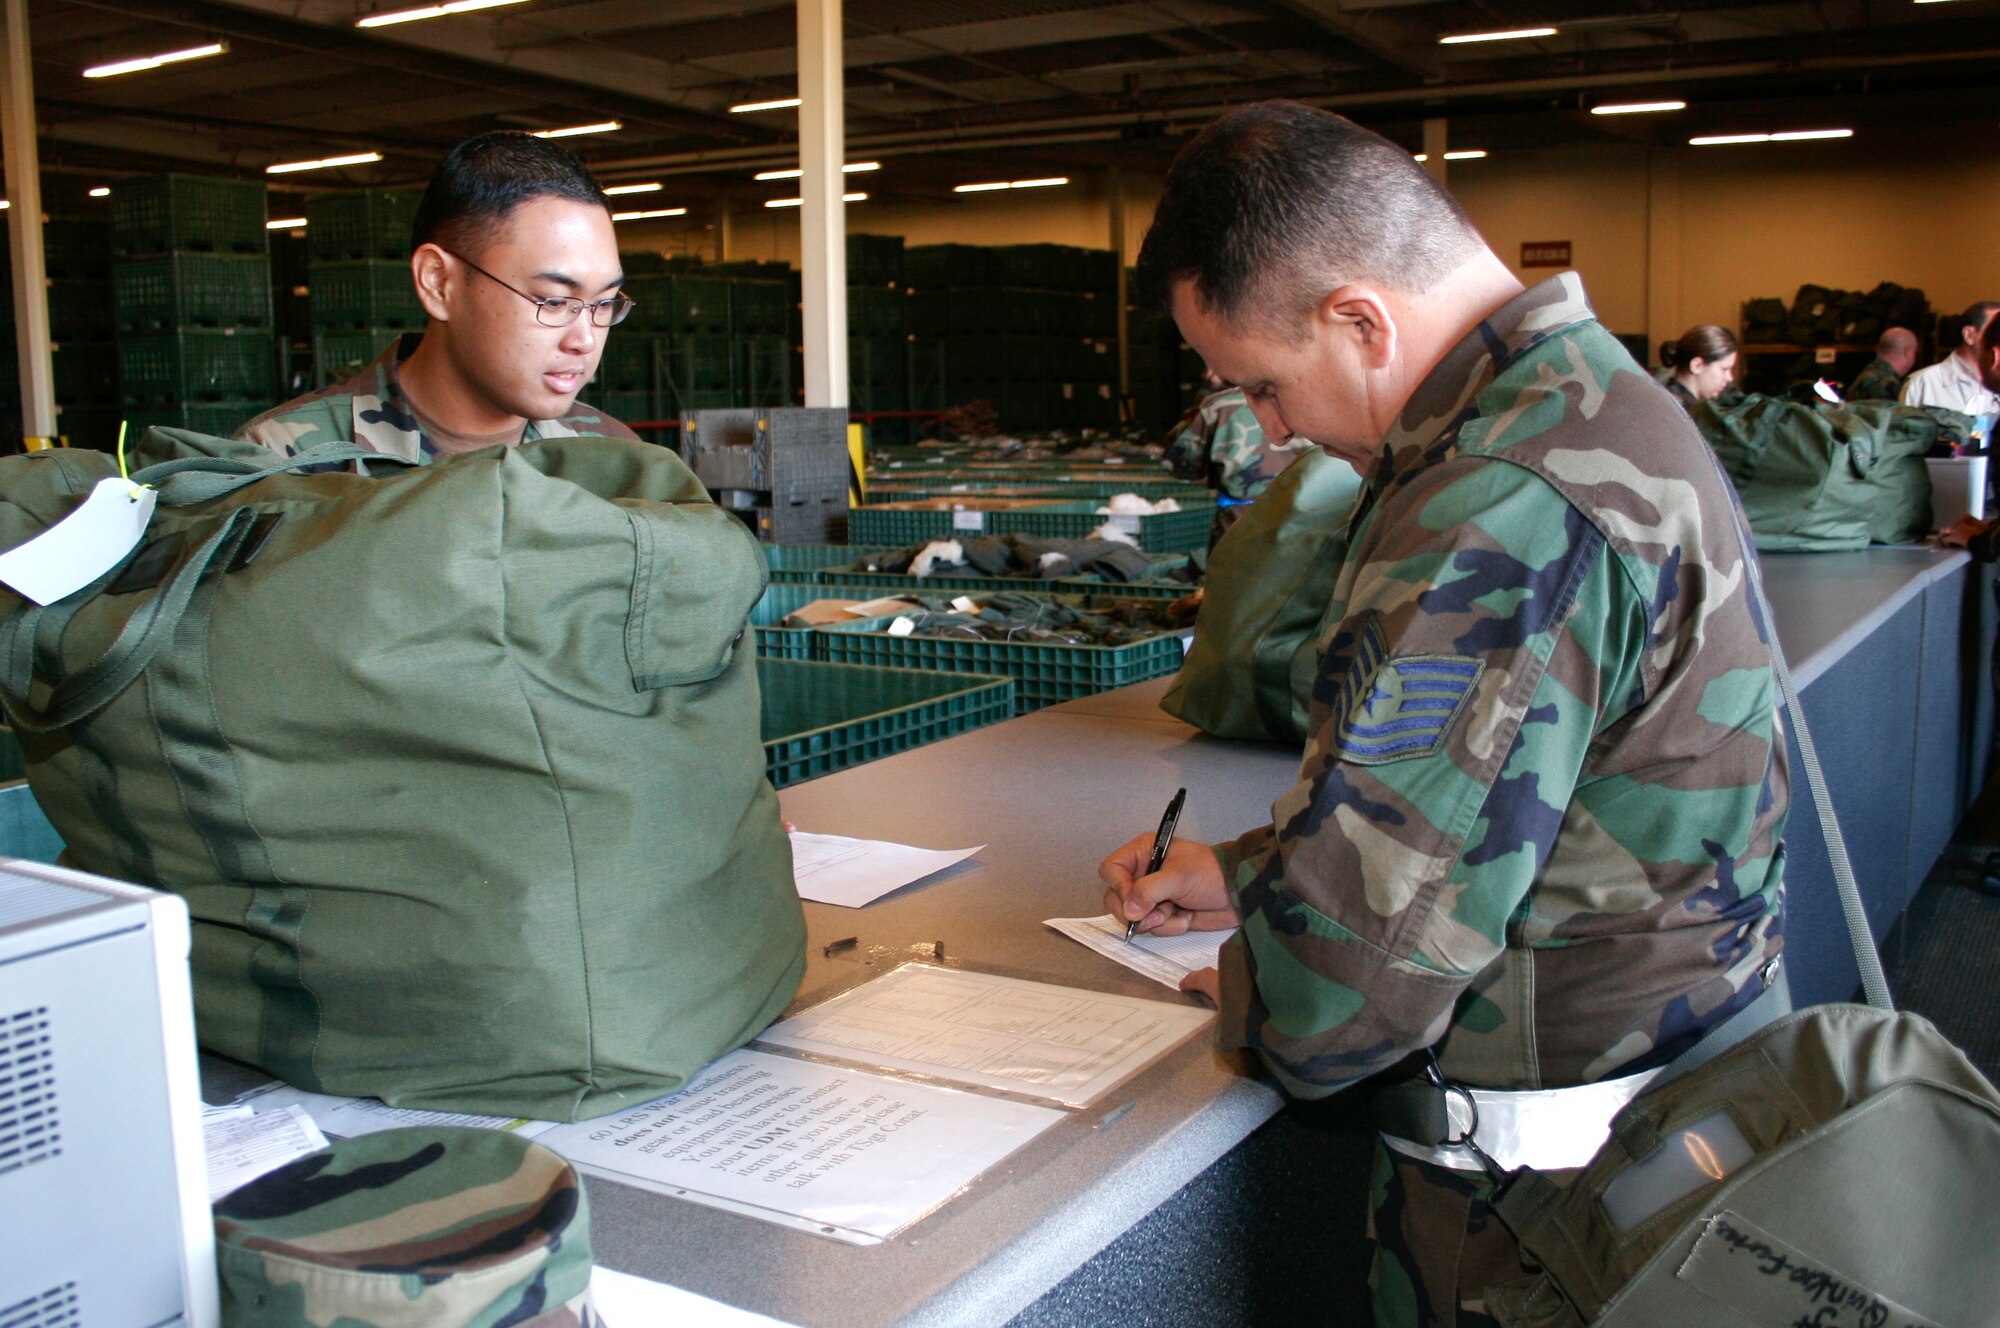 Airman 1st Class Jonathan Malumay, 60th Logistics Readiness Squadron, checks over an inventory sheet for a C-bag being provided to Tech. Sgt. Ruben Quinterofarias, 60th Services Squadron, during the Crisis Look 07-02 deployment exercise held on Travis Air Force Base, Calif. (U. S. Air Force photo Laura Fentress)